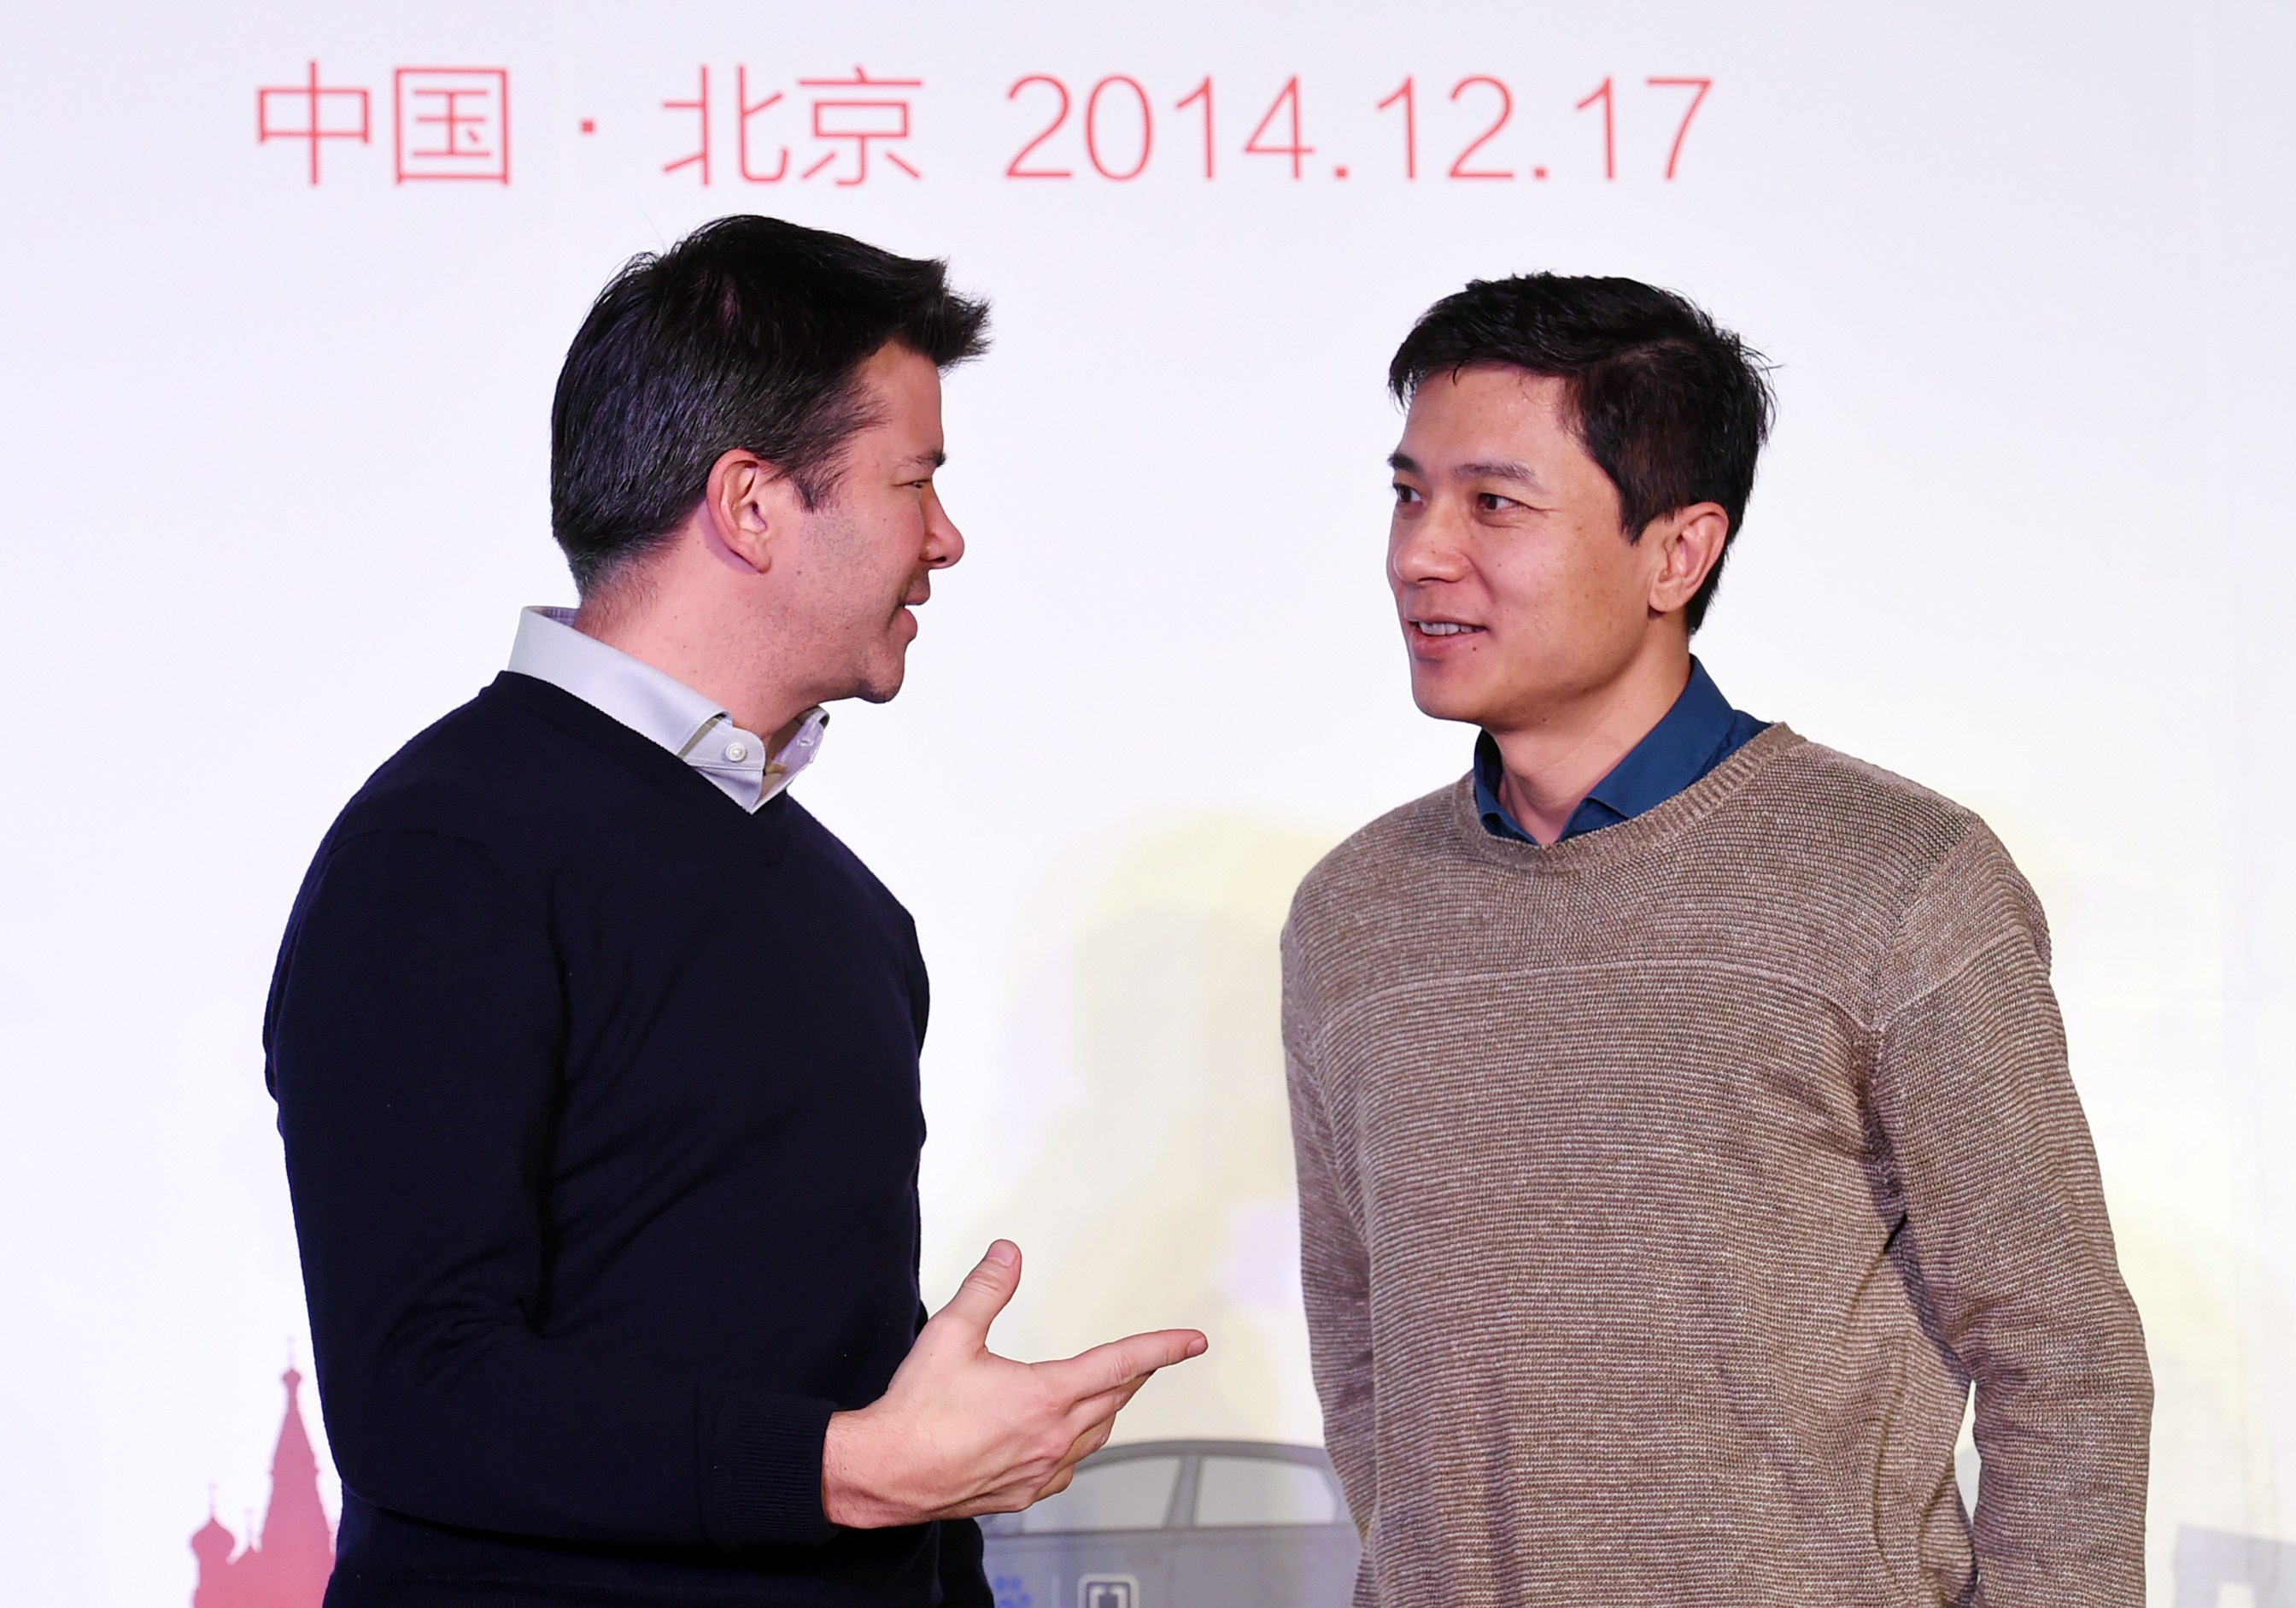 Uber CEO Travis Kalanick (L) and Baidu Chairman and CEO Robin Li at a signing ceremony and press conference in Beijing on Dec. 17, 2014. (Greg Barker—AFP/Getty Images)